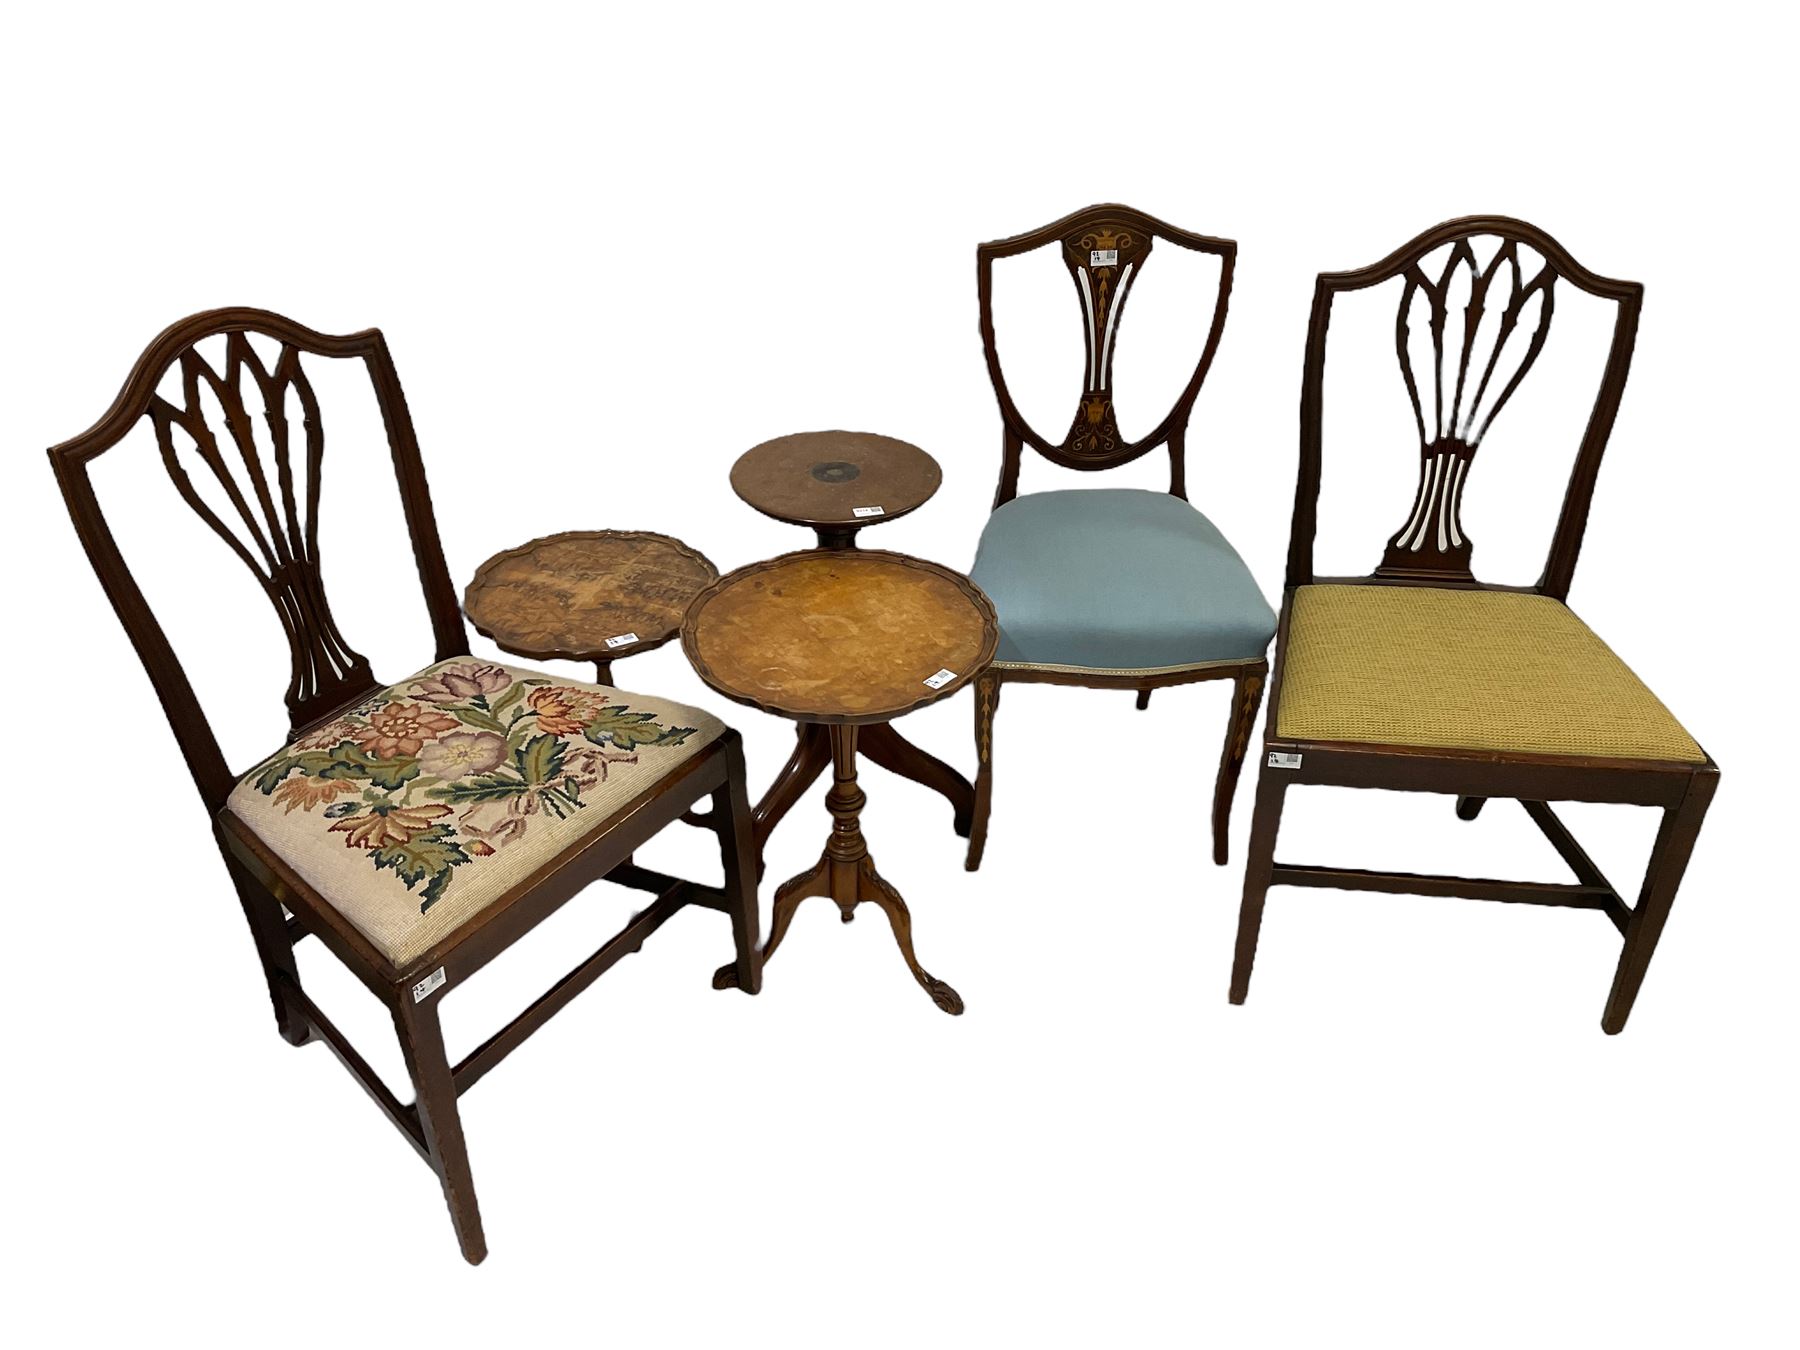 Edwardian inlaid shield-back chair and pair of Georgian side chairs with pierced splat backs and dro